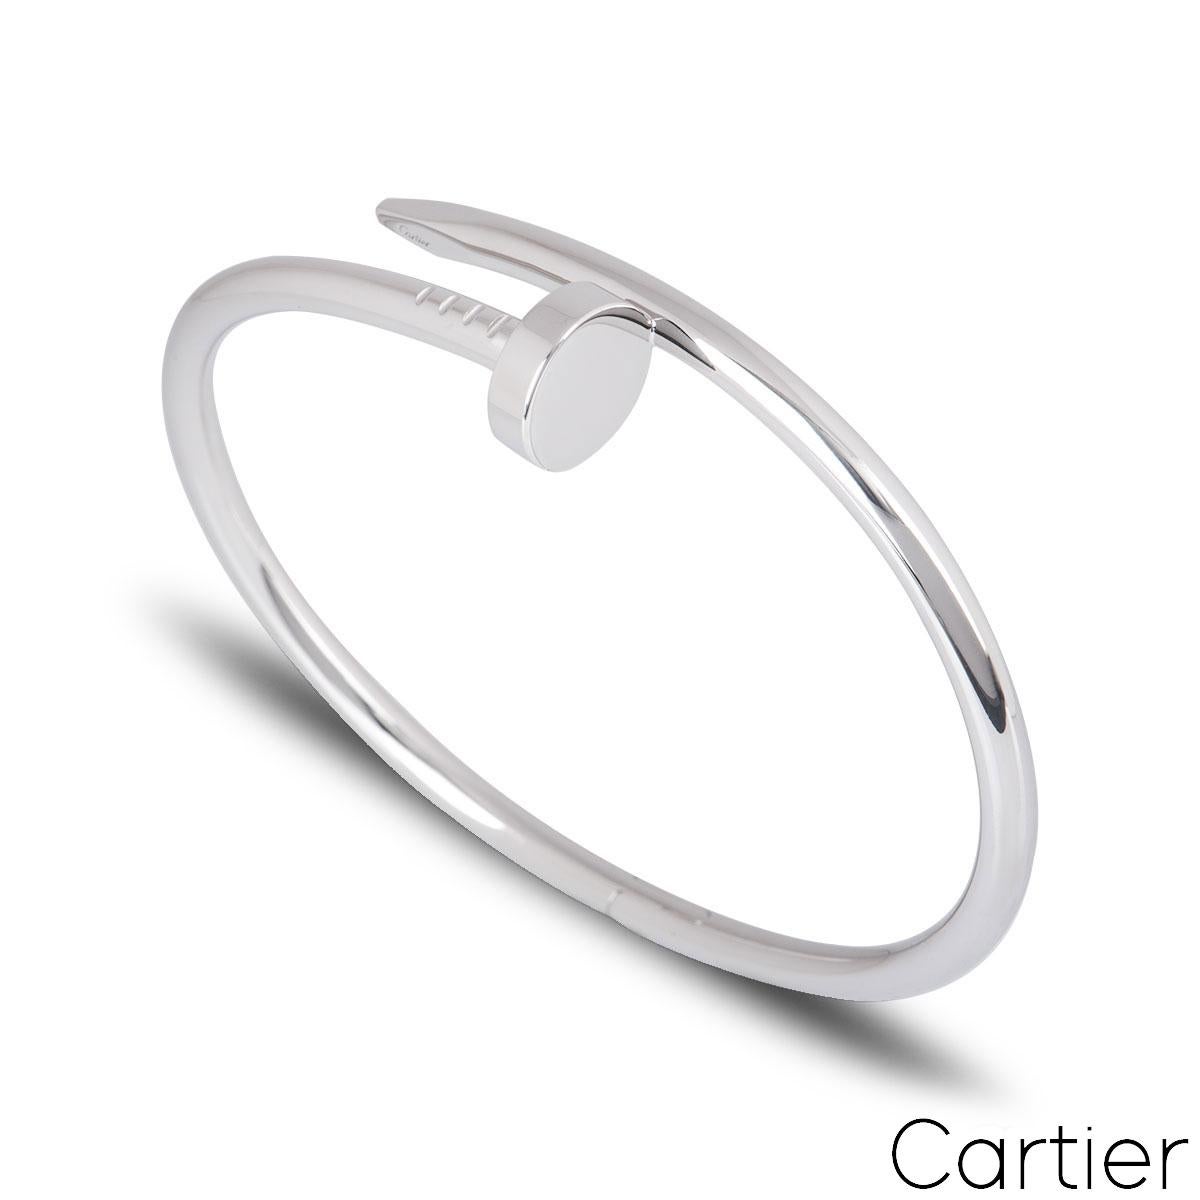 An exquisite 18k white gold Cartier bracelet from the Juste Un Clou collection. The bracelet is wrapped around with a nail head at one end and nail end at the other tip. The bracelet is size 15 with the new style clasp fitting and has a gross weight